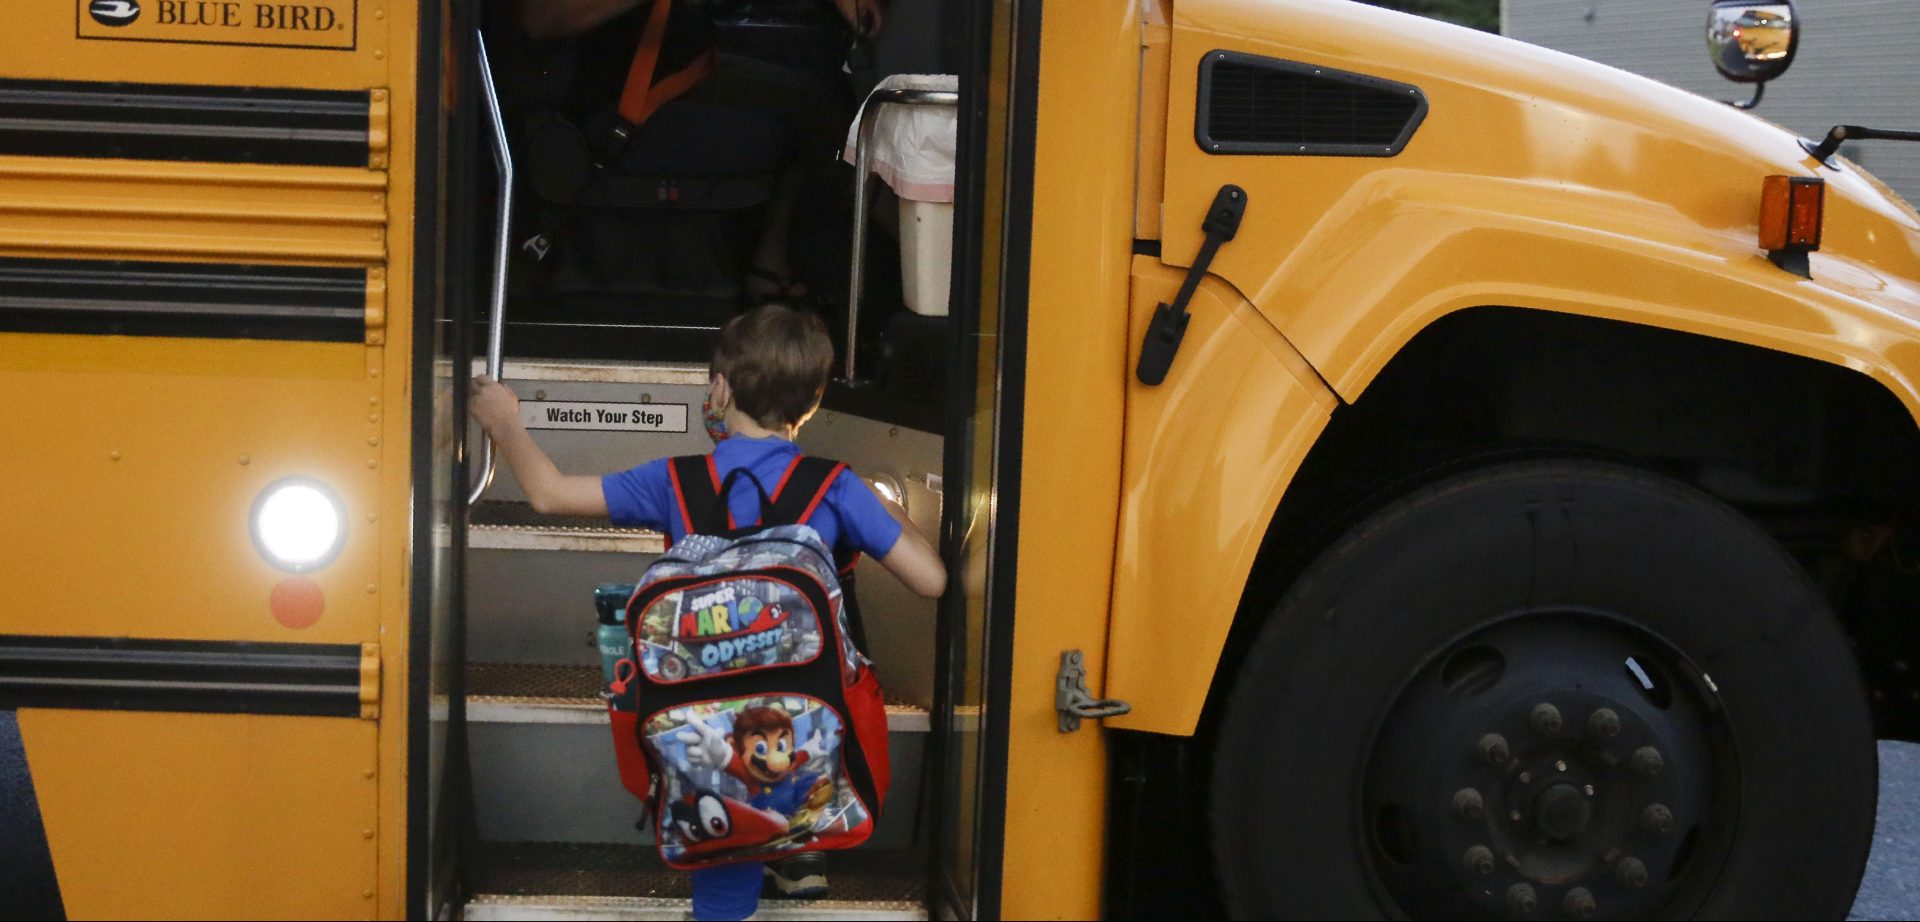 Paul Adamus, 7, climbs the stairs of a bus before the first day of school on Monday, Aug. 3, 2020, in Dallas, Ga. Adamus is among tens of thousands of students in Georgia and across the nation who were set to resume in-person school Monday for the first time since March. 